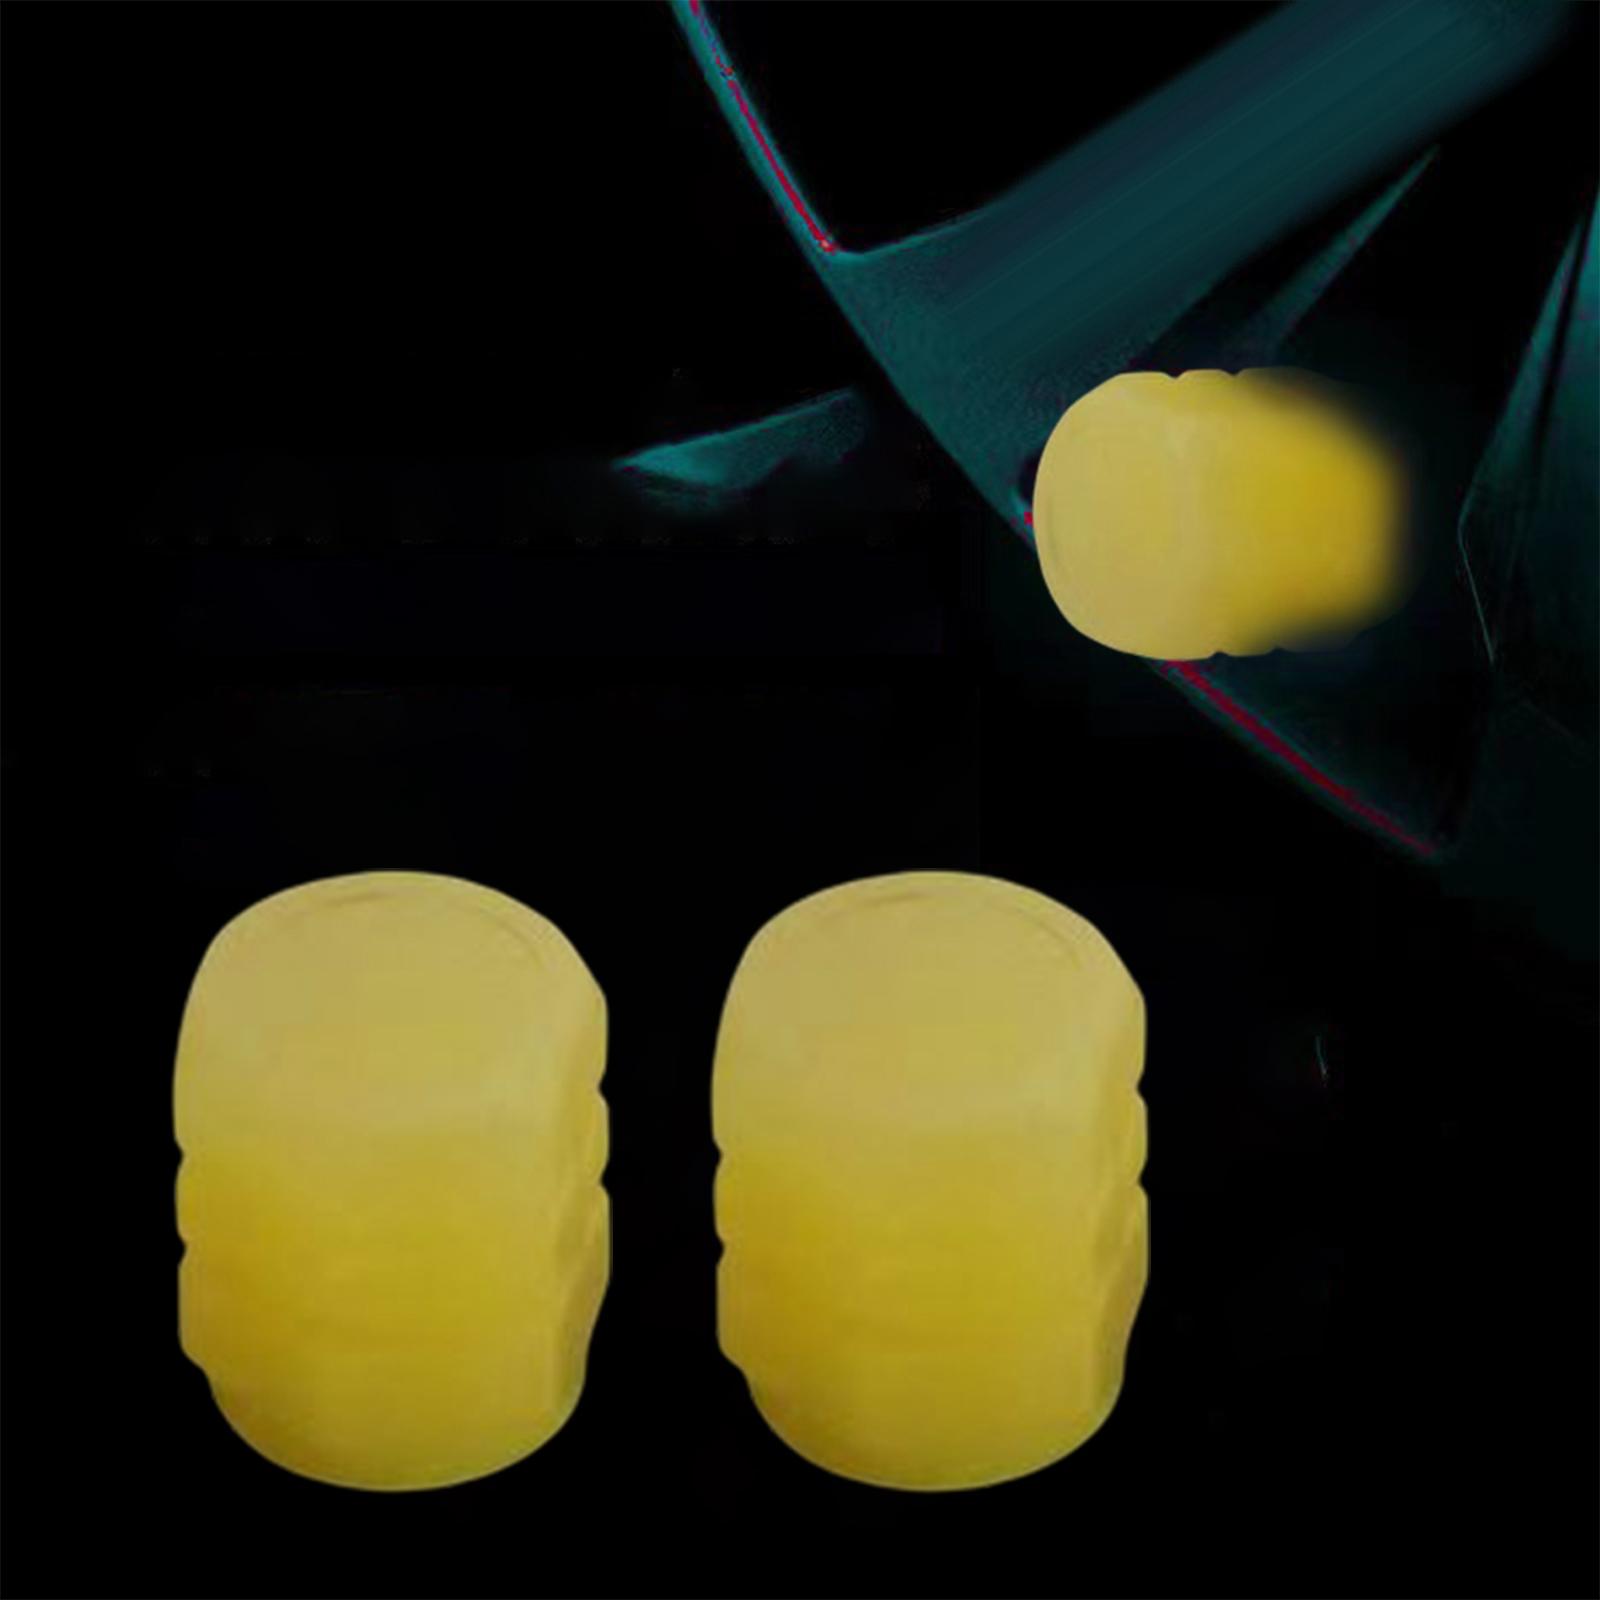 2x Car Valve Caps Covers Luminous for Universal Cars Electric Vehicle Yellow